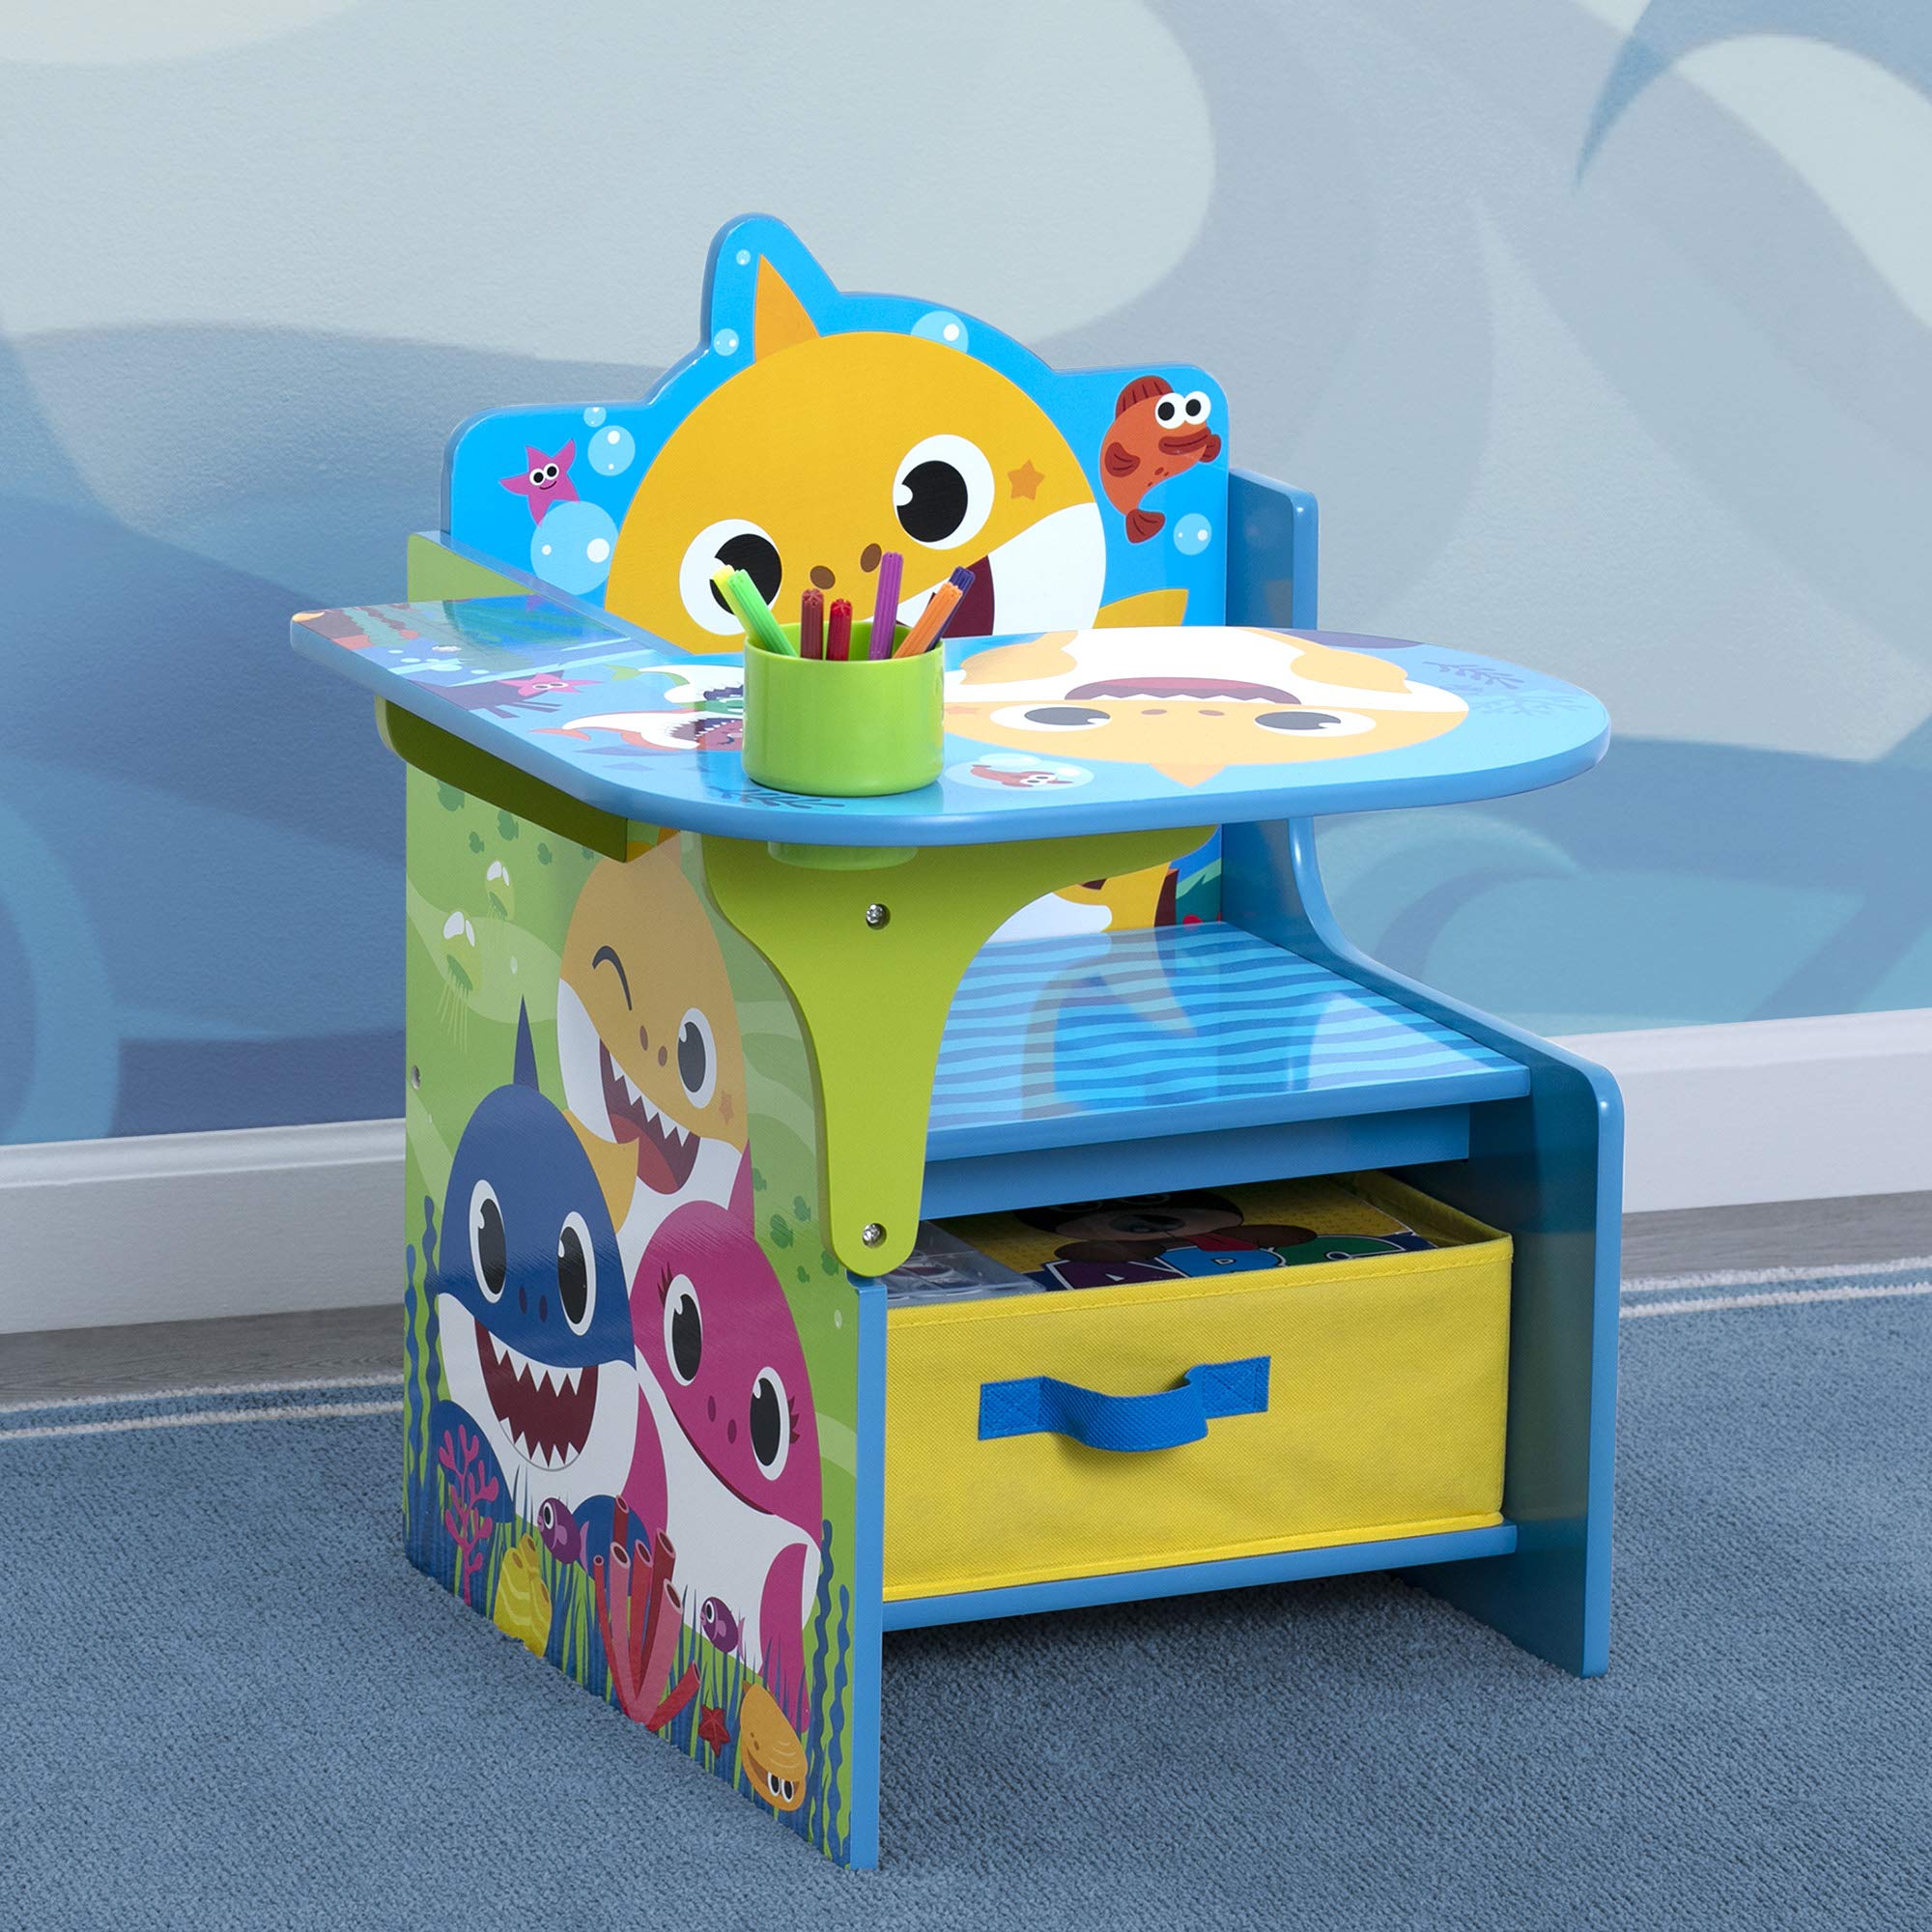 Baby Shark Chair Desk with Storage Bin - Ideal for Arts & Crafts, Snack Time, Homeschooling, Homework & More by Delta Children